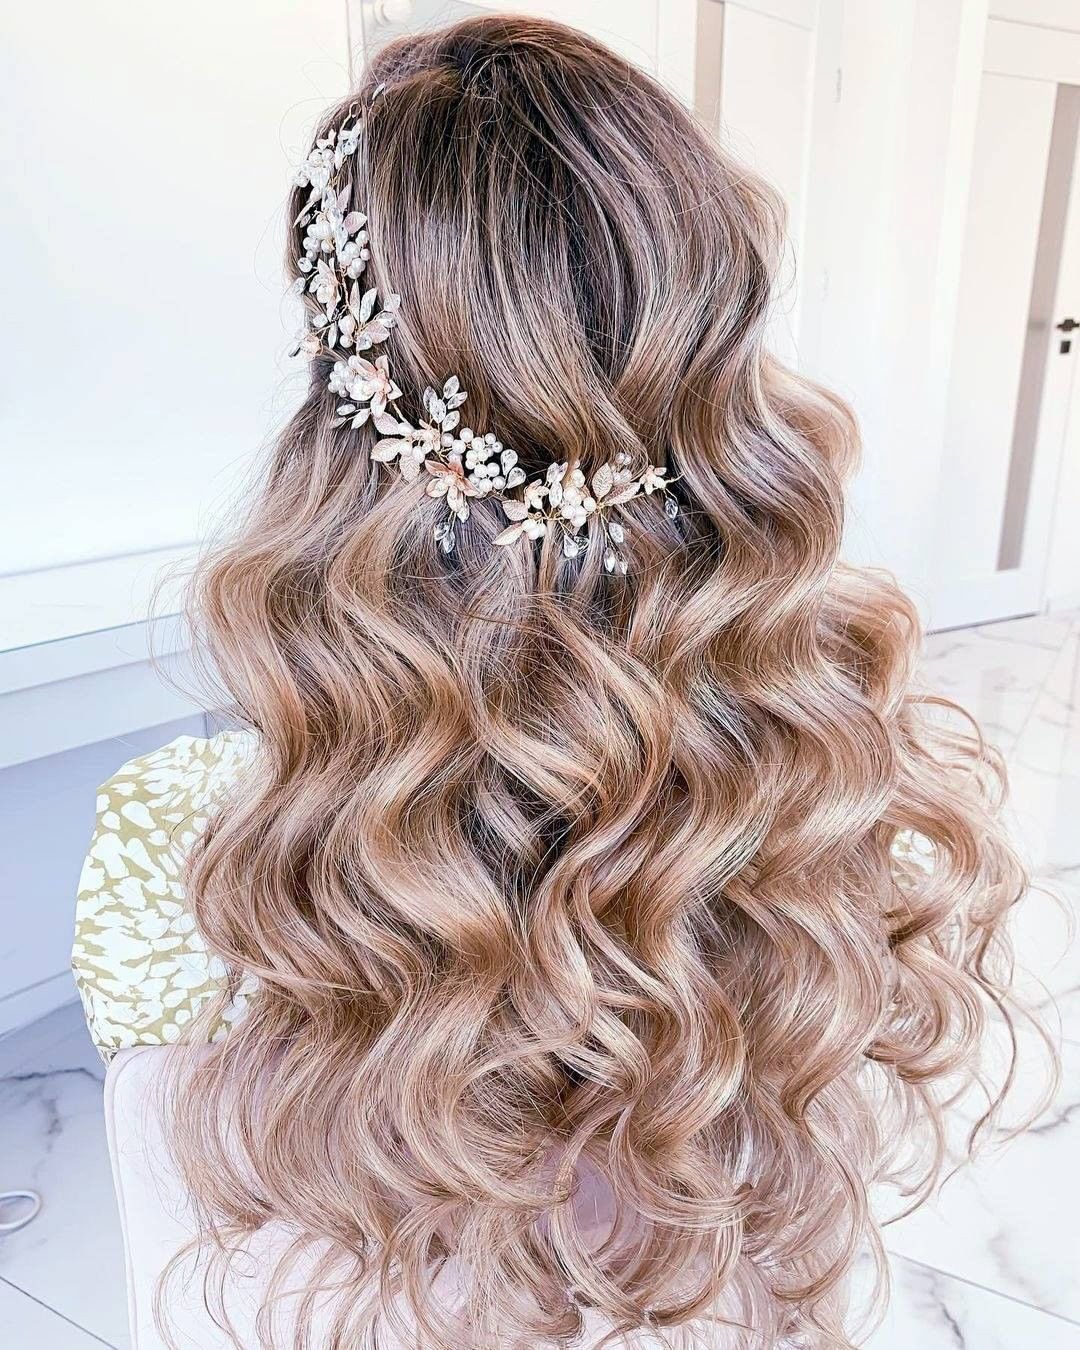 wedding hairstyles down chic curls on long hair sweetvjewelry